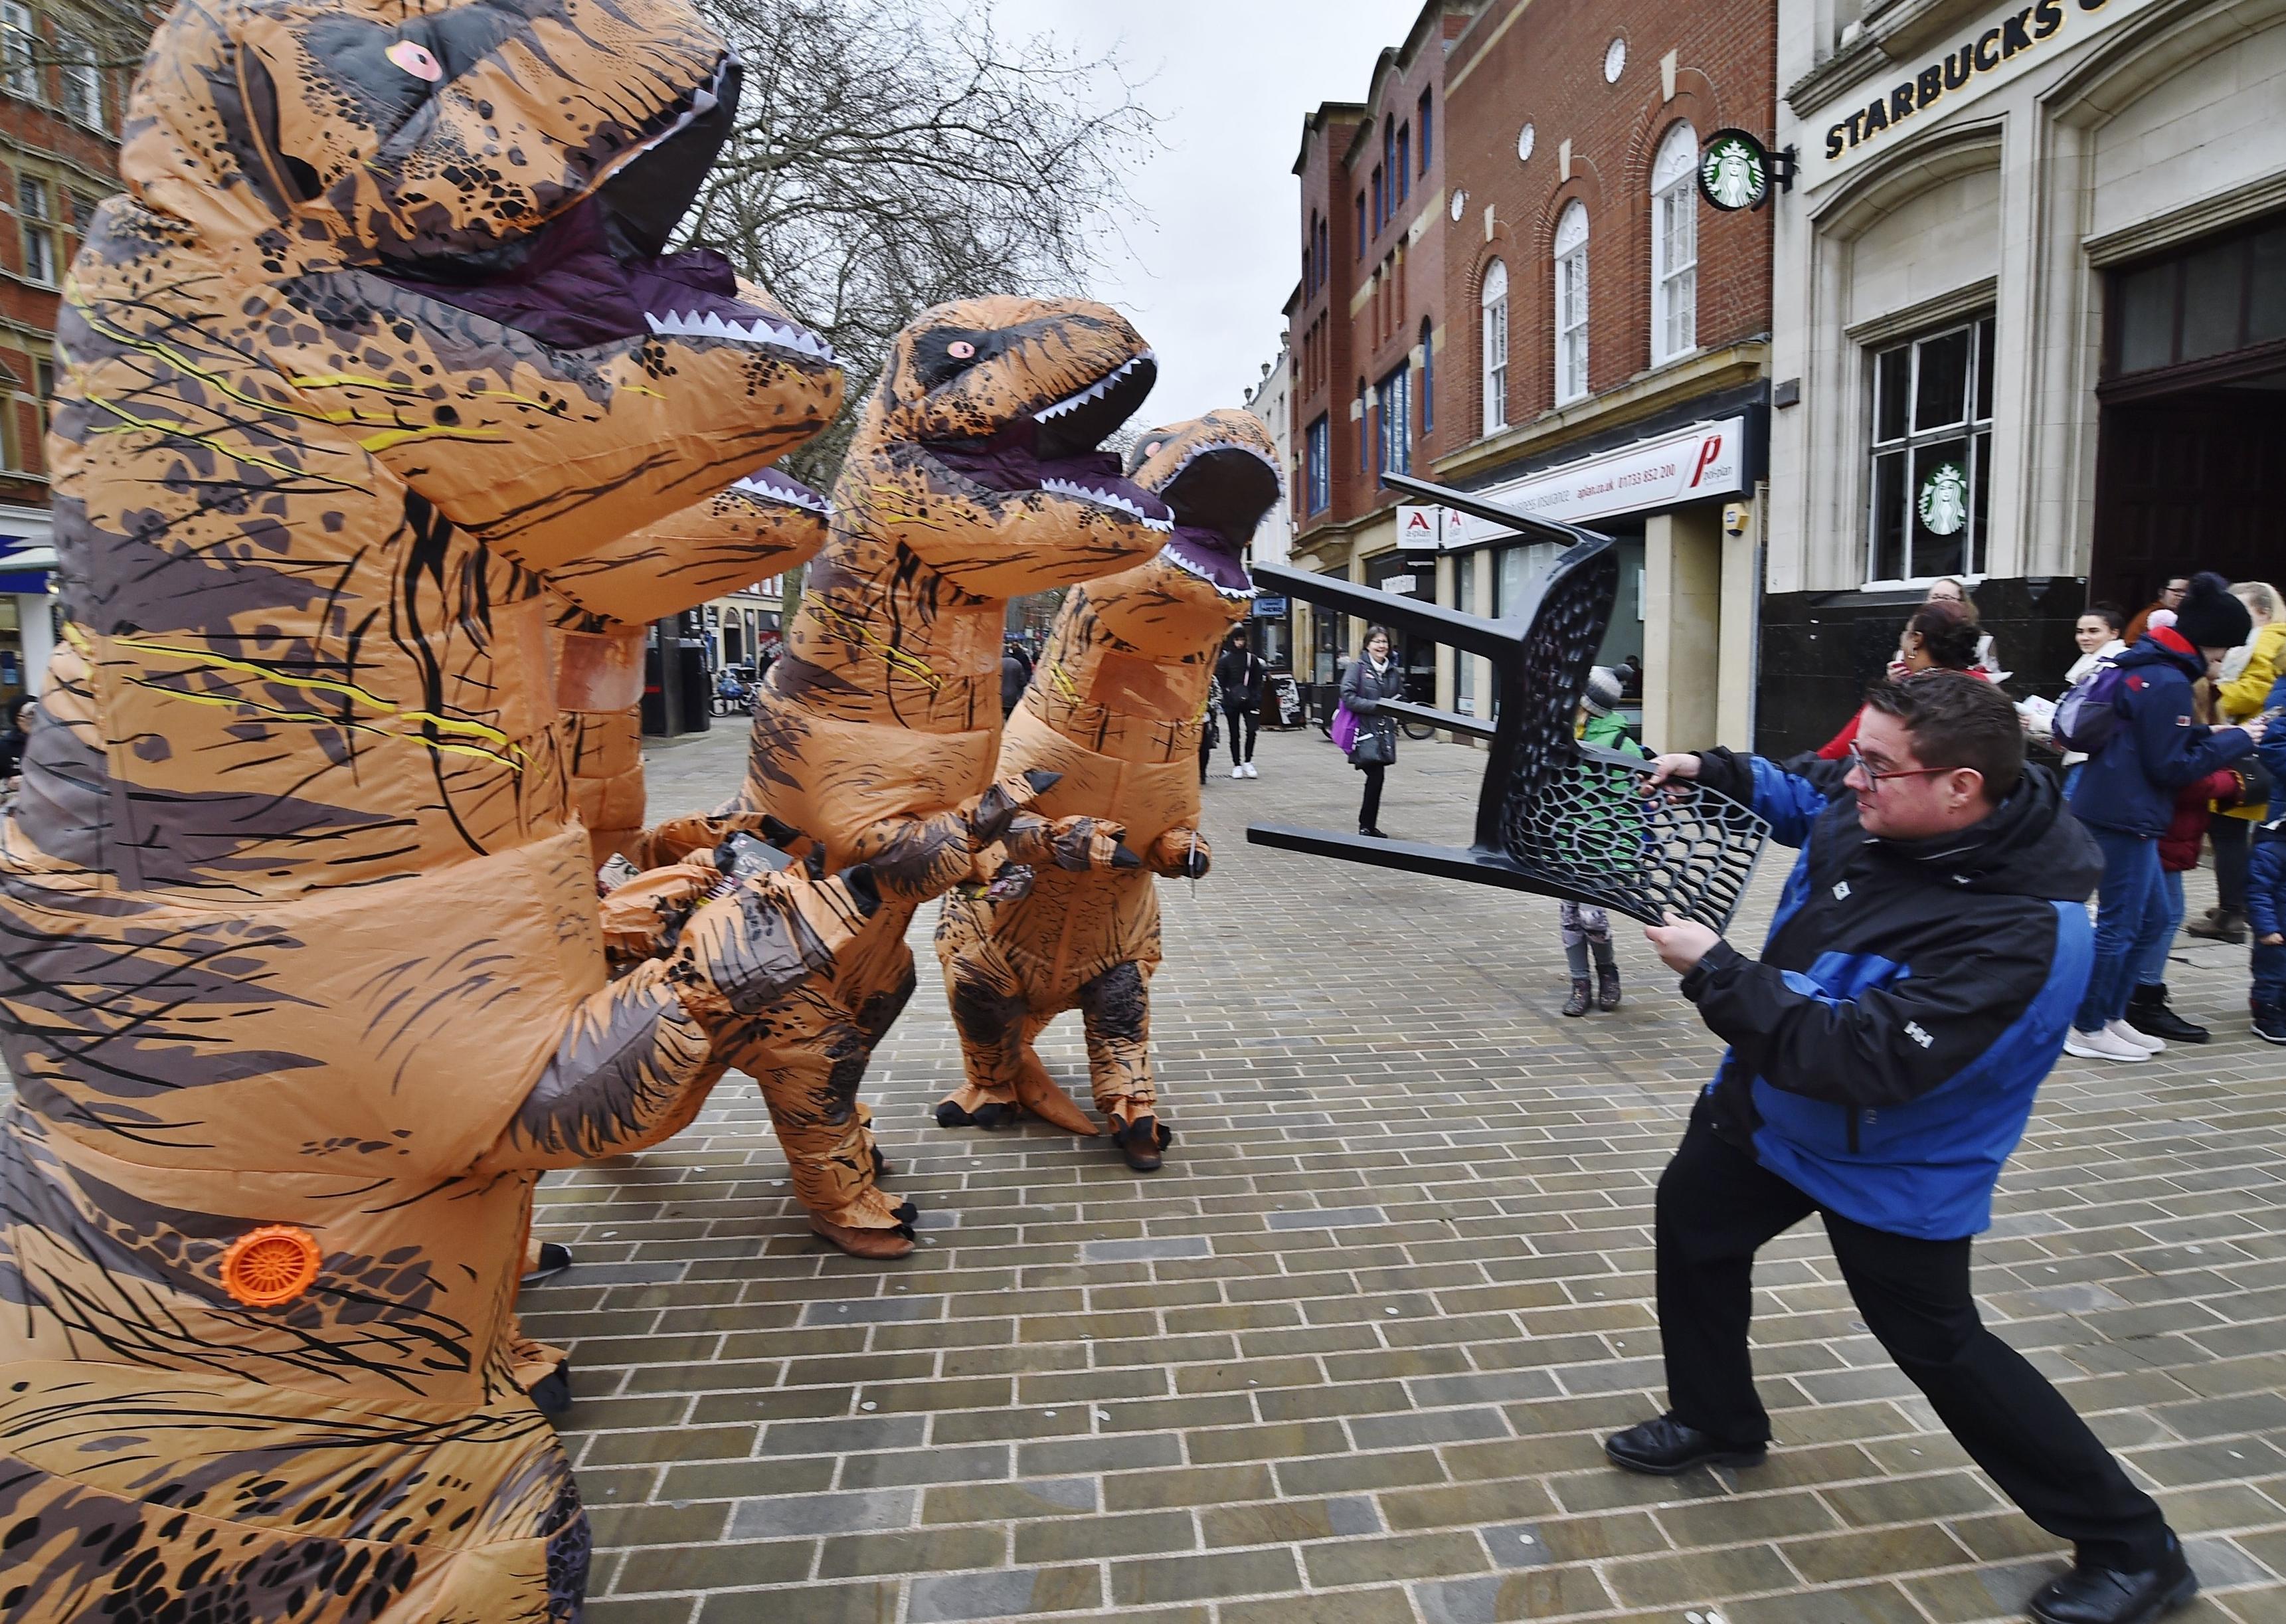 Dinosaurs visit Peterborough ahead of a major exhibition at the cathedral